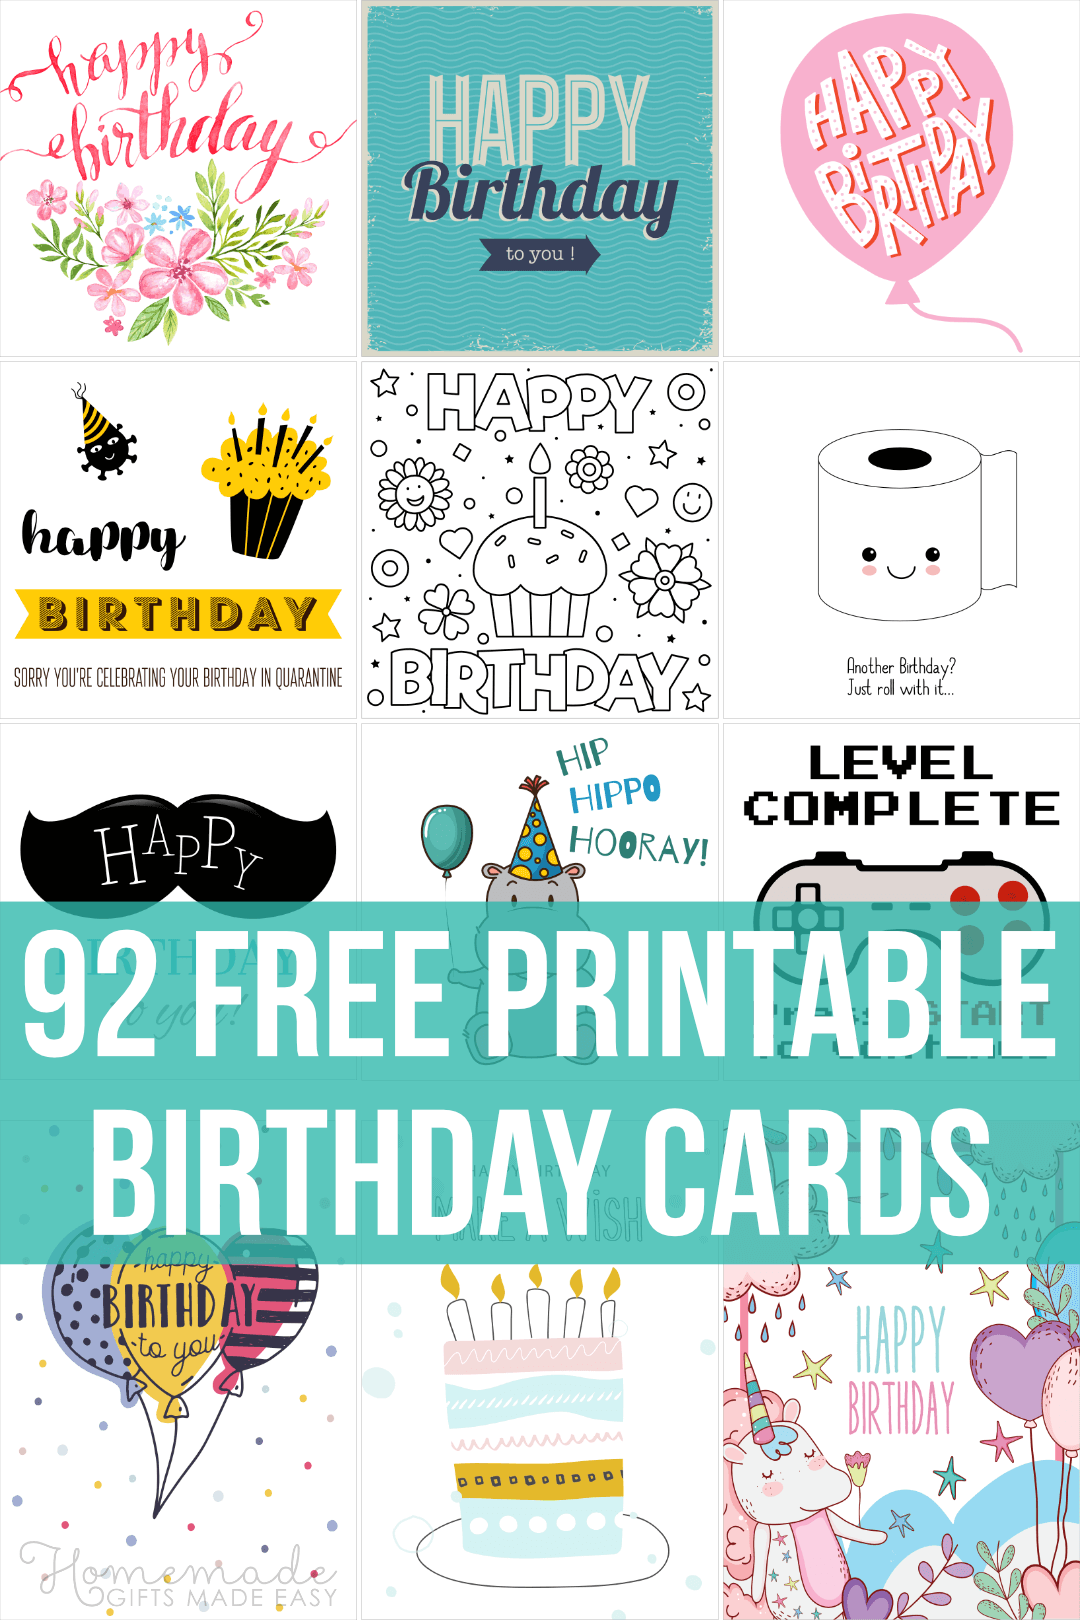 7 Free Printable Birthday Cards For Him, Her, Kids and Adults